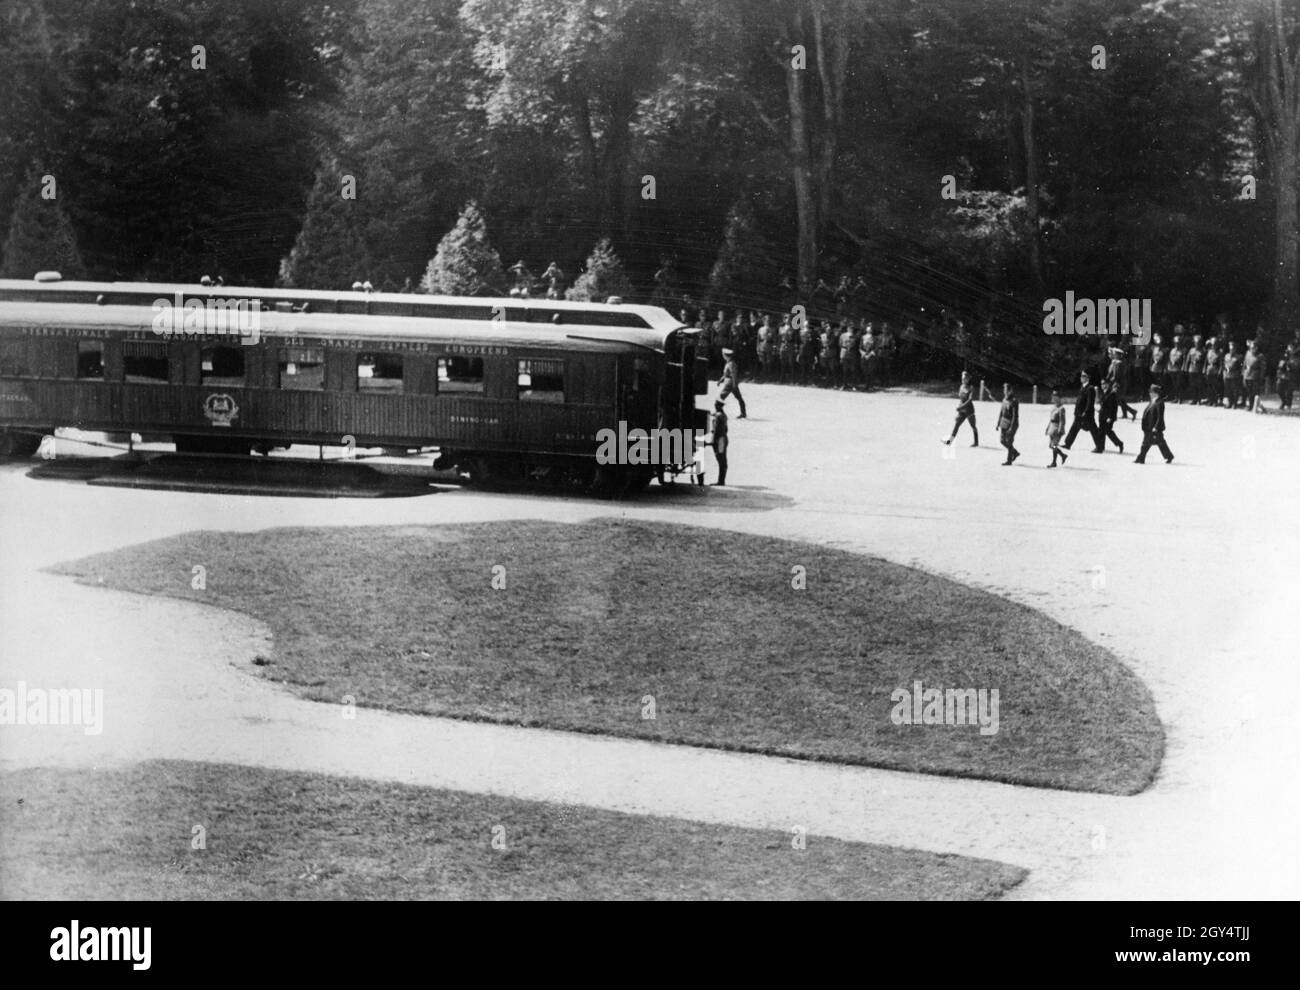 Armistice negotiations between France and Germany in June 1940 in the historic railway carriage on the circular square in the forest of Compiègne. [automated translation] Stock Photo